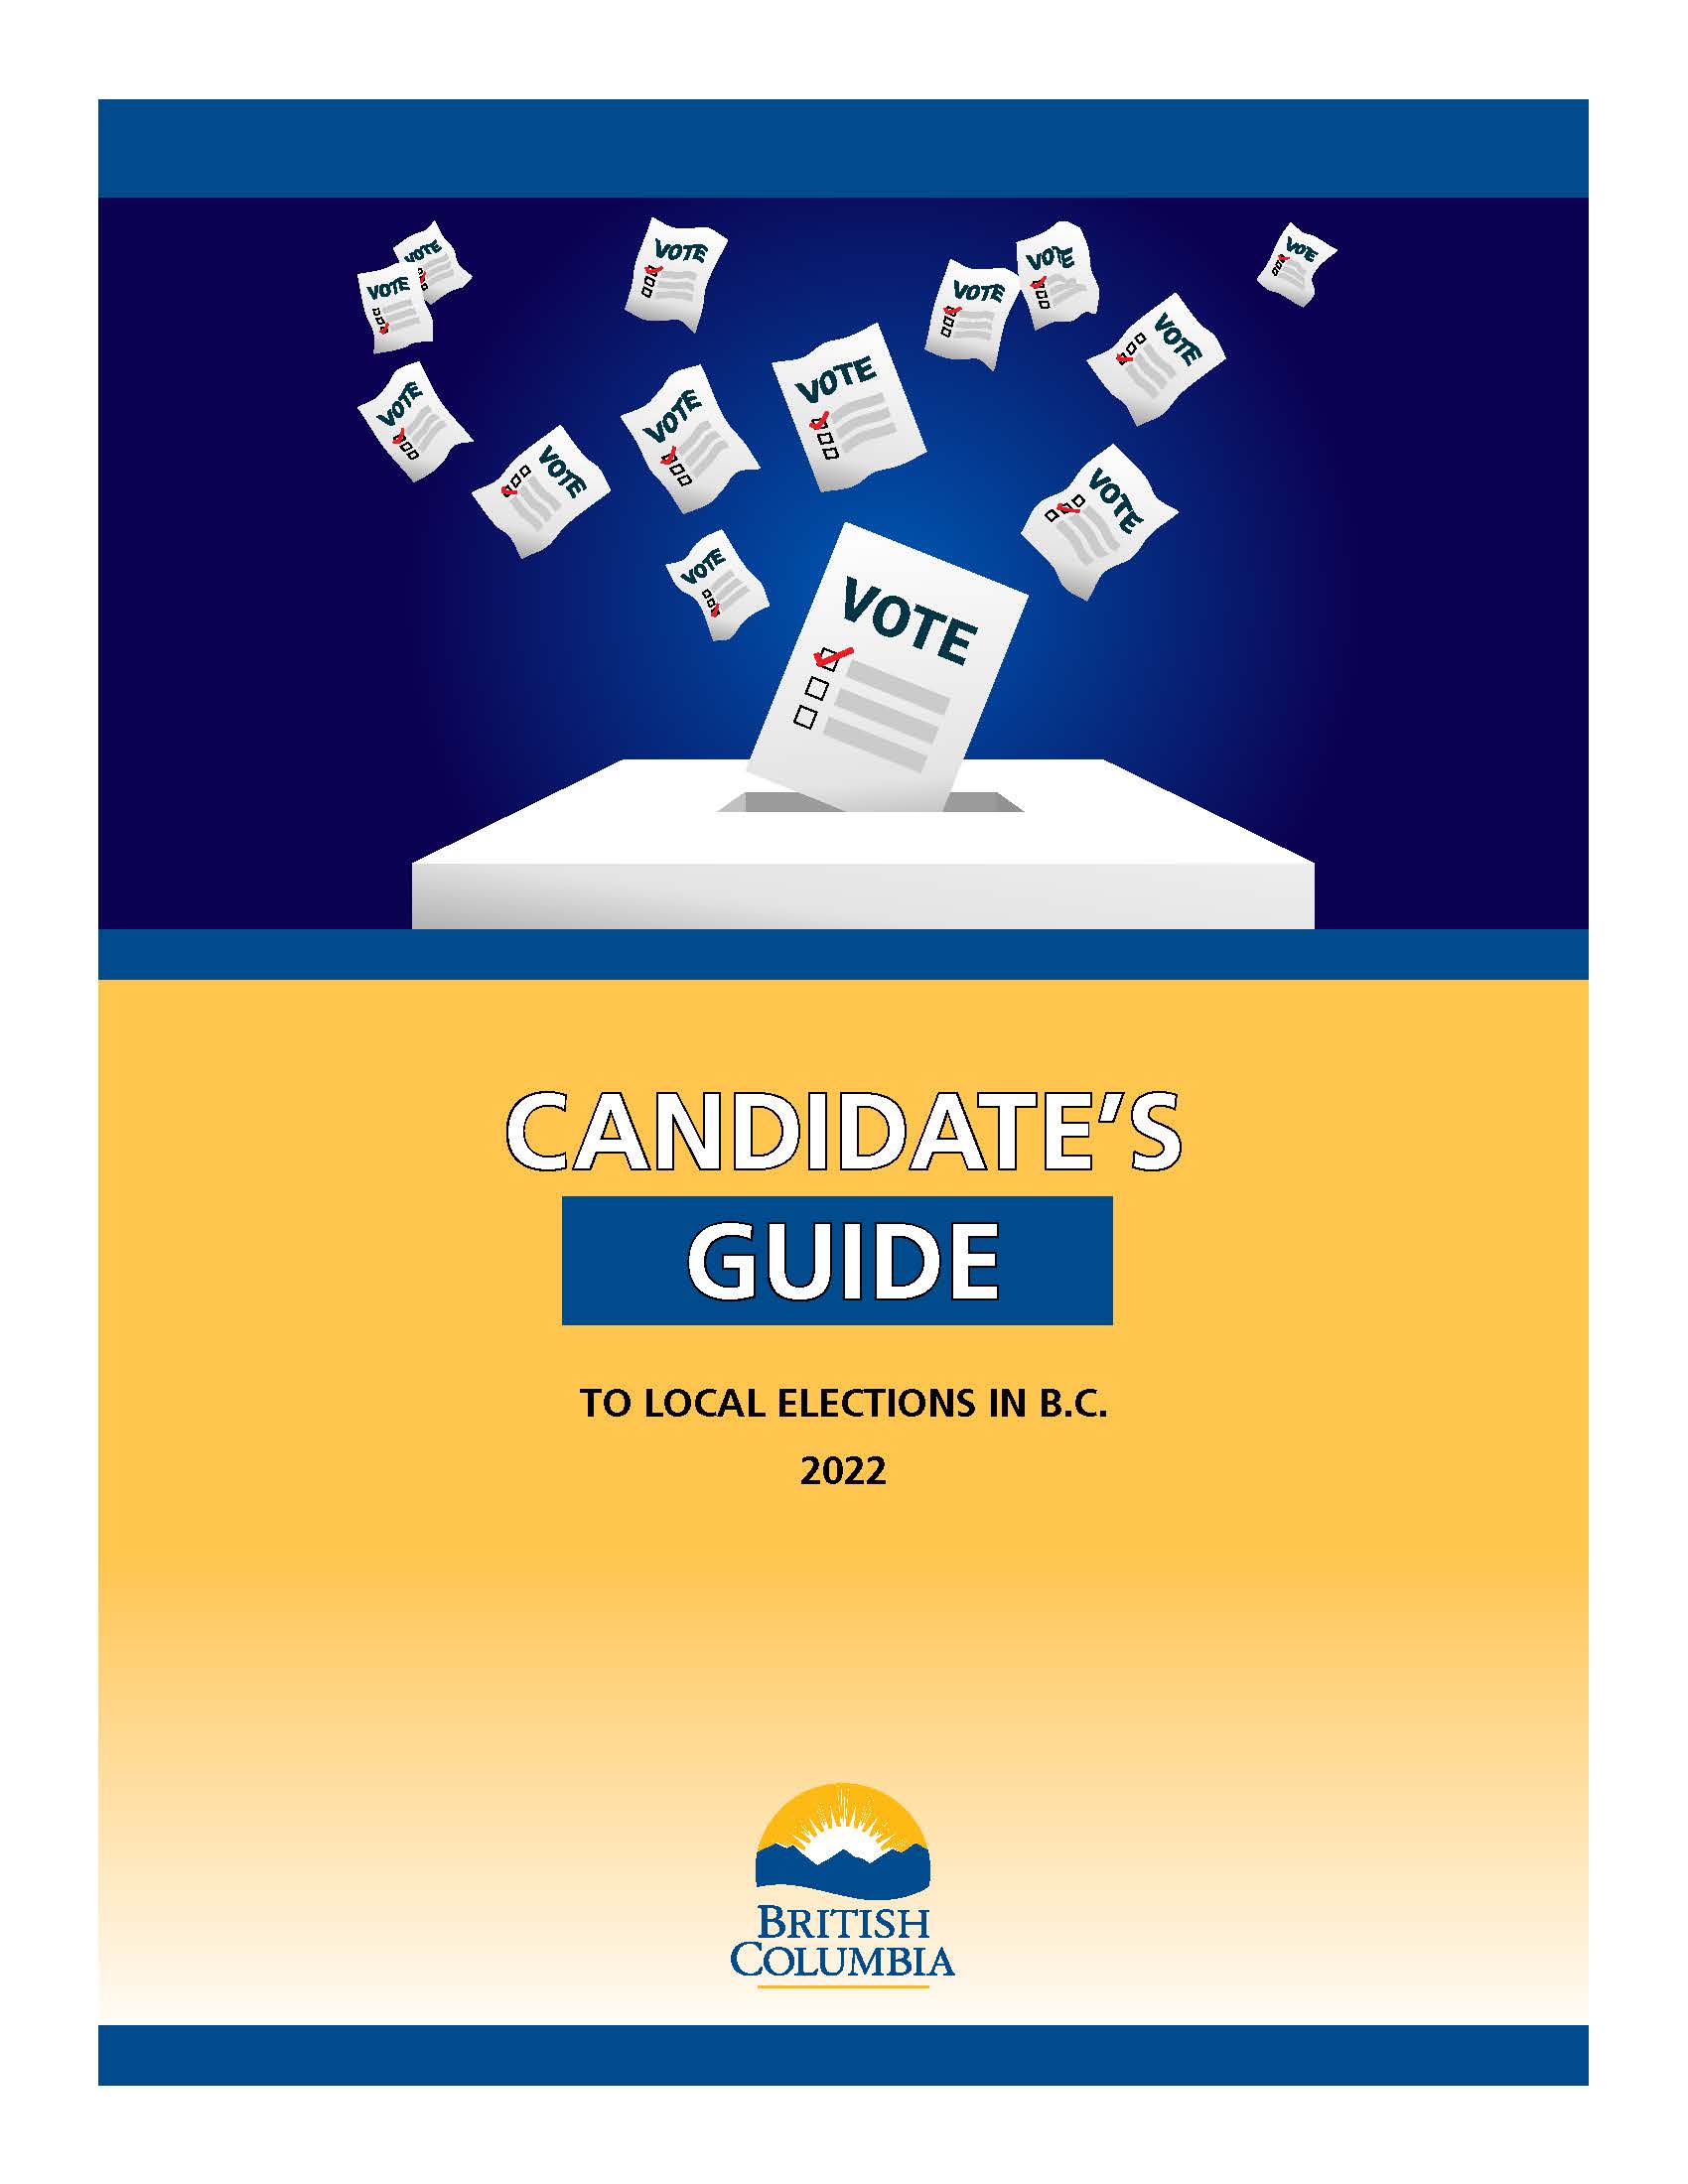 Download the Candidate's Guide to Local Elections in B.C. (PDF)